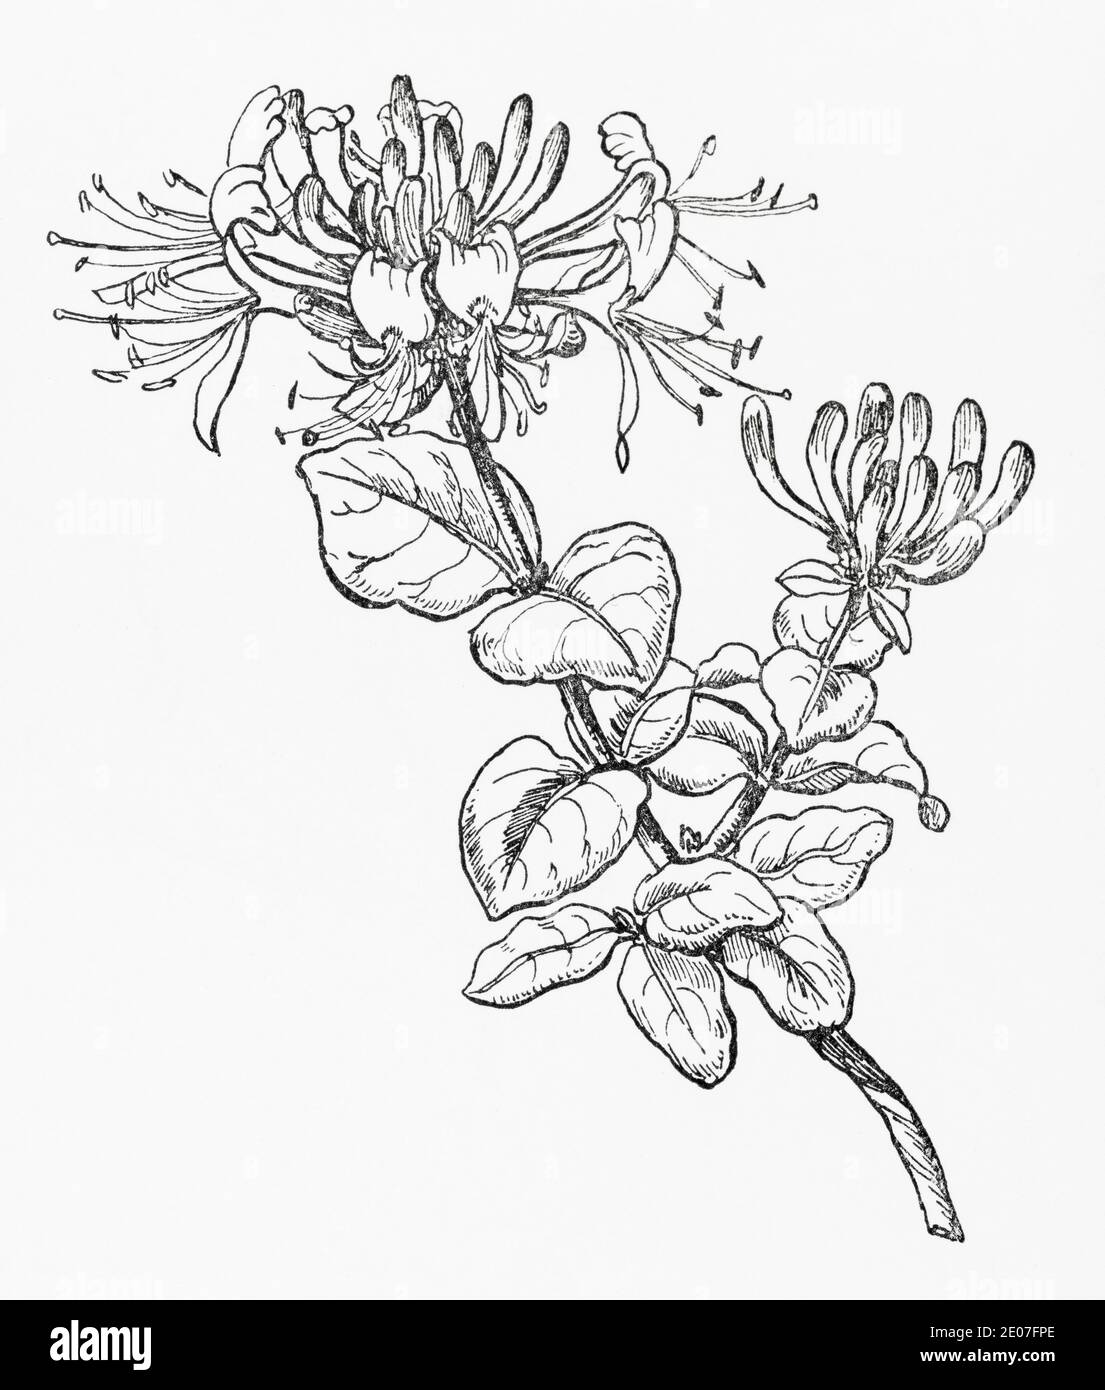 Old botanical illustration engraving of Honeysuckle, Woodbine / Lonicera periclymenum. Traditional medicinal herbal plant. See Notes Stock Photo